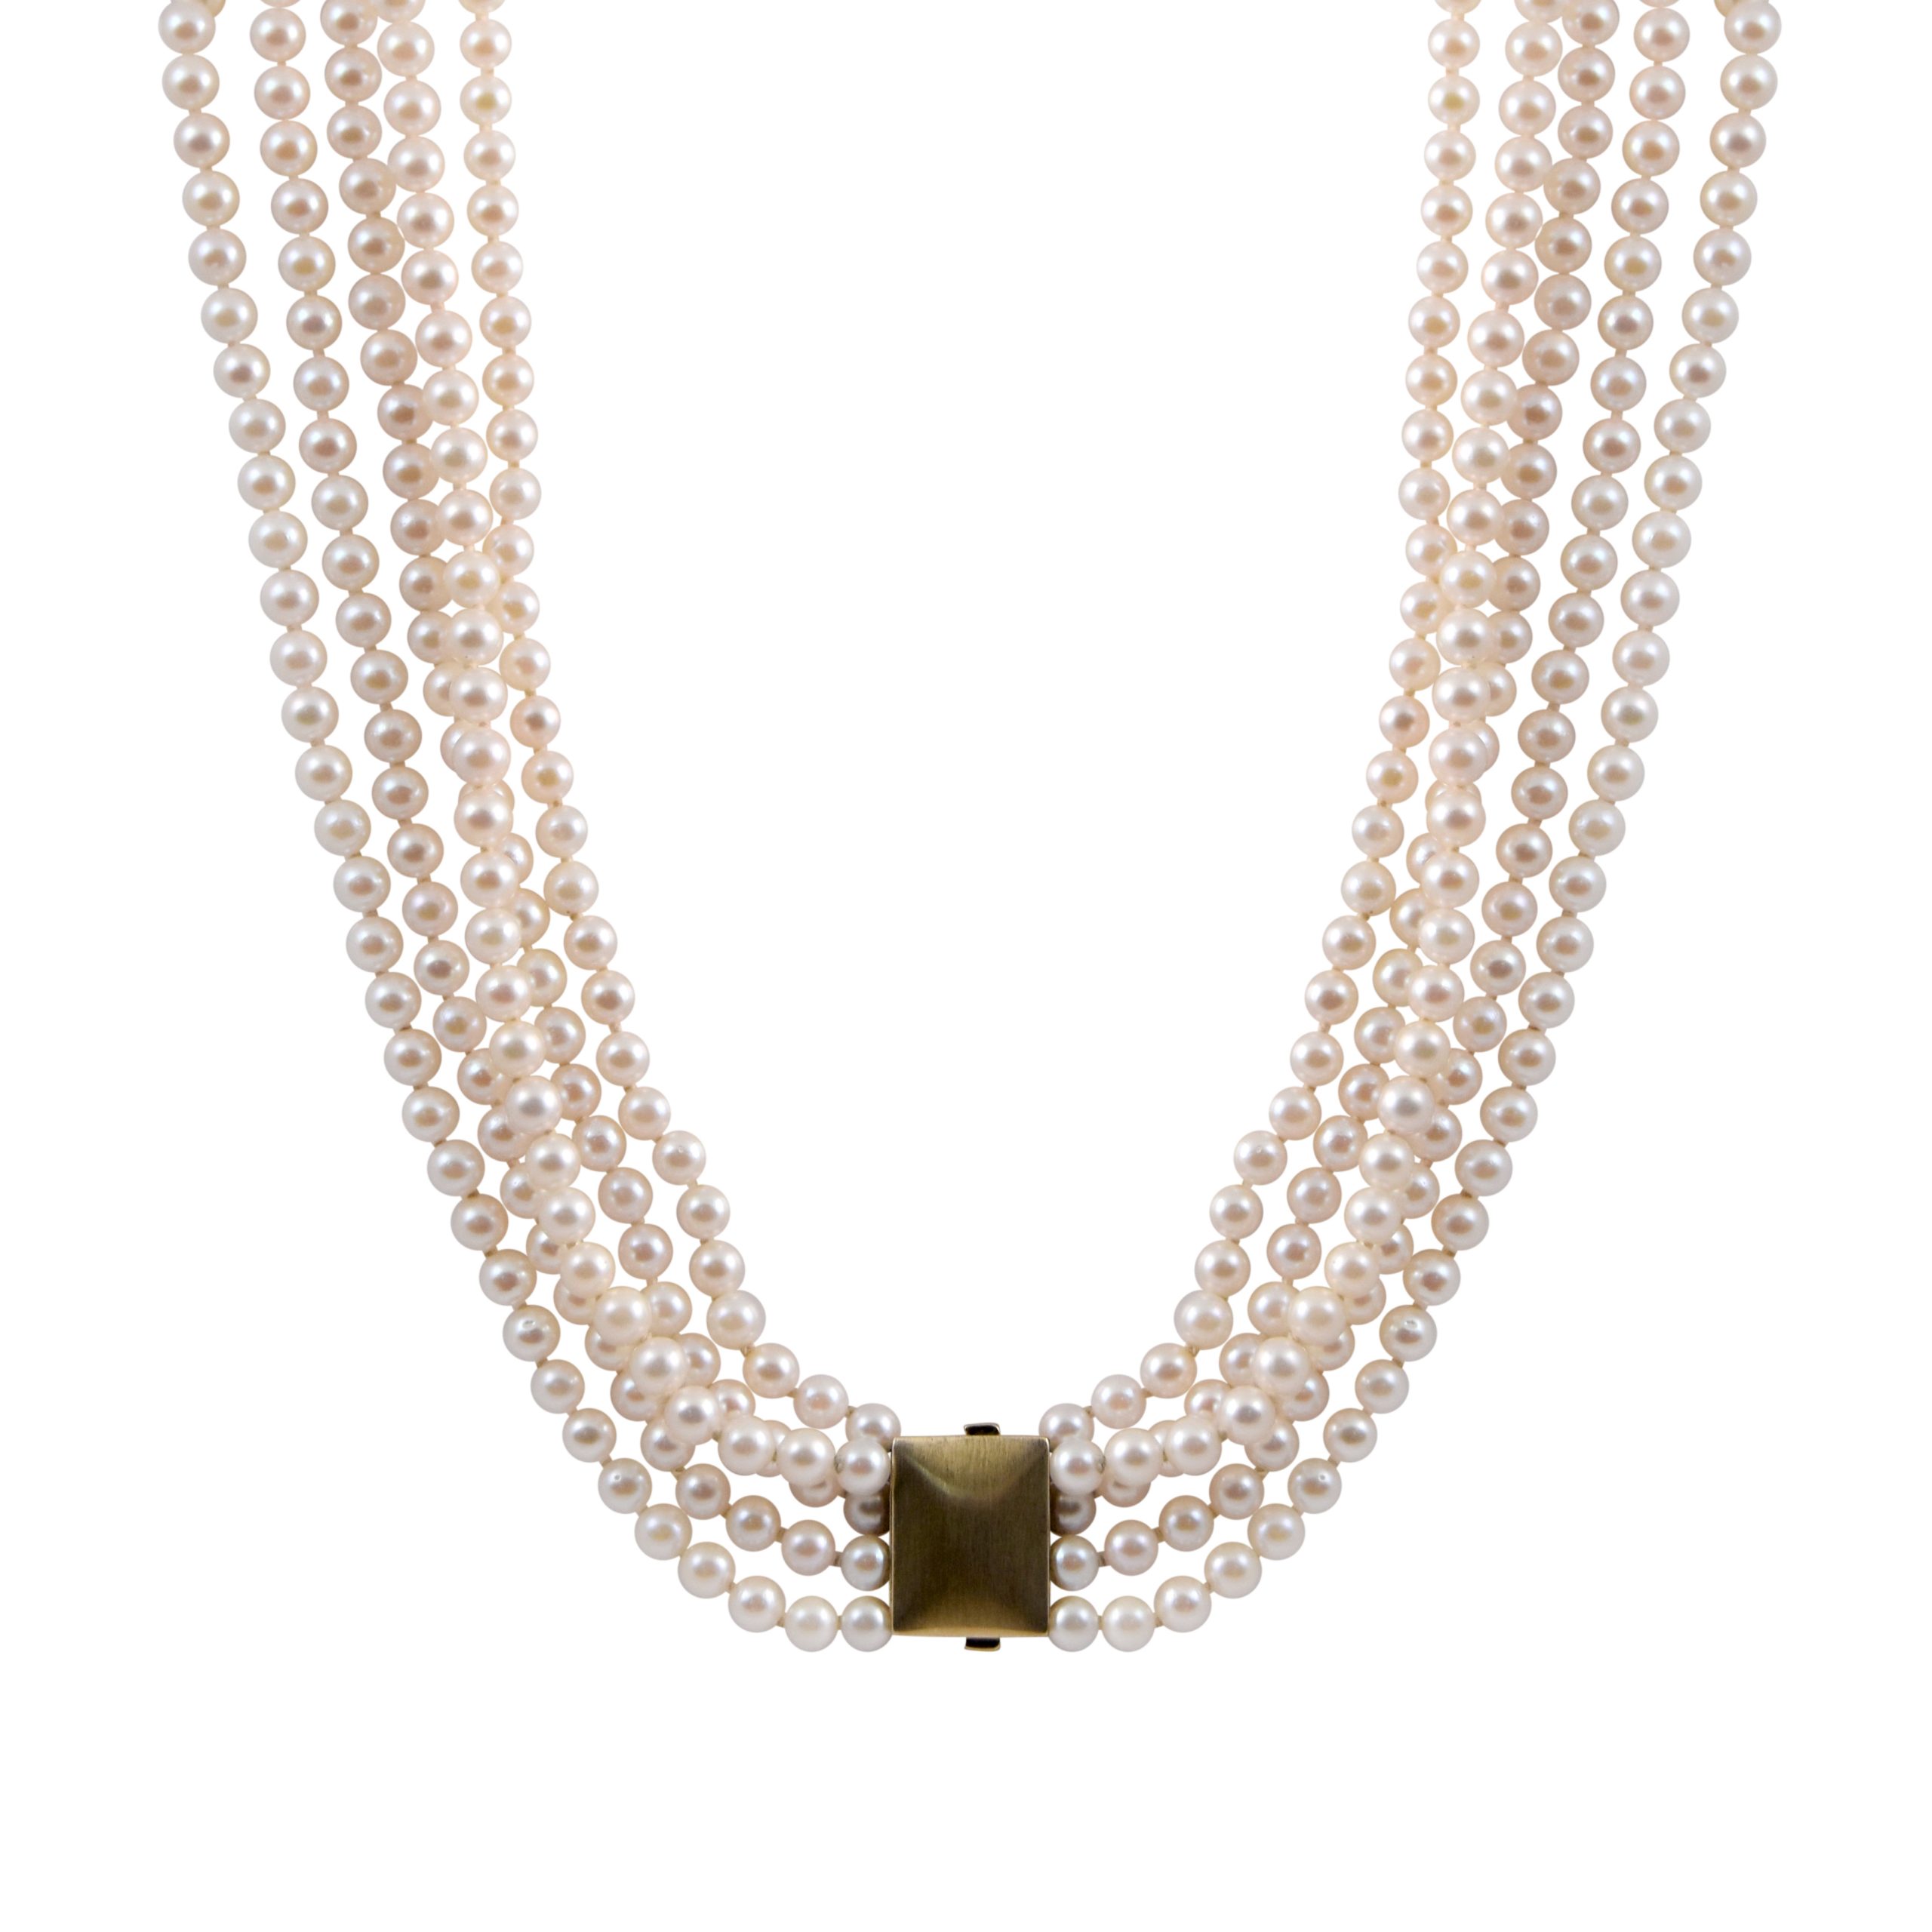 Dillard's Pearls and Chains Long Multi-Strand Necklace | Dillard's